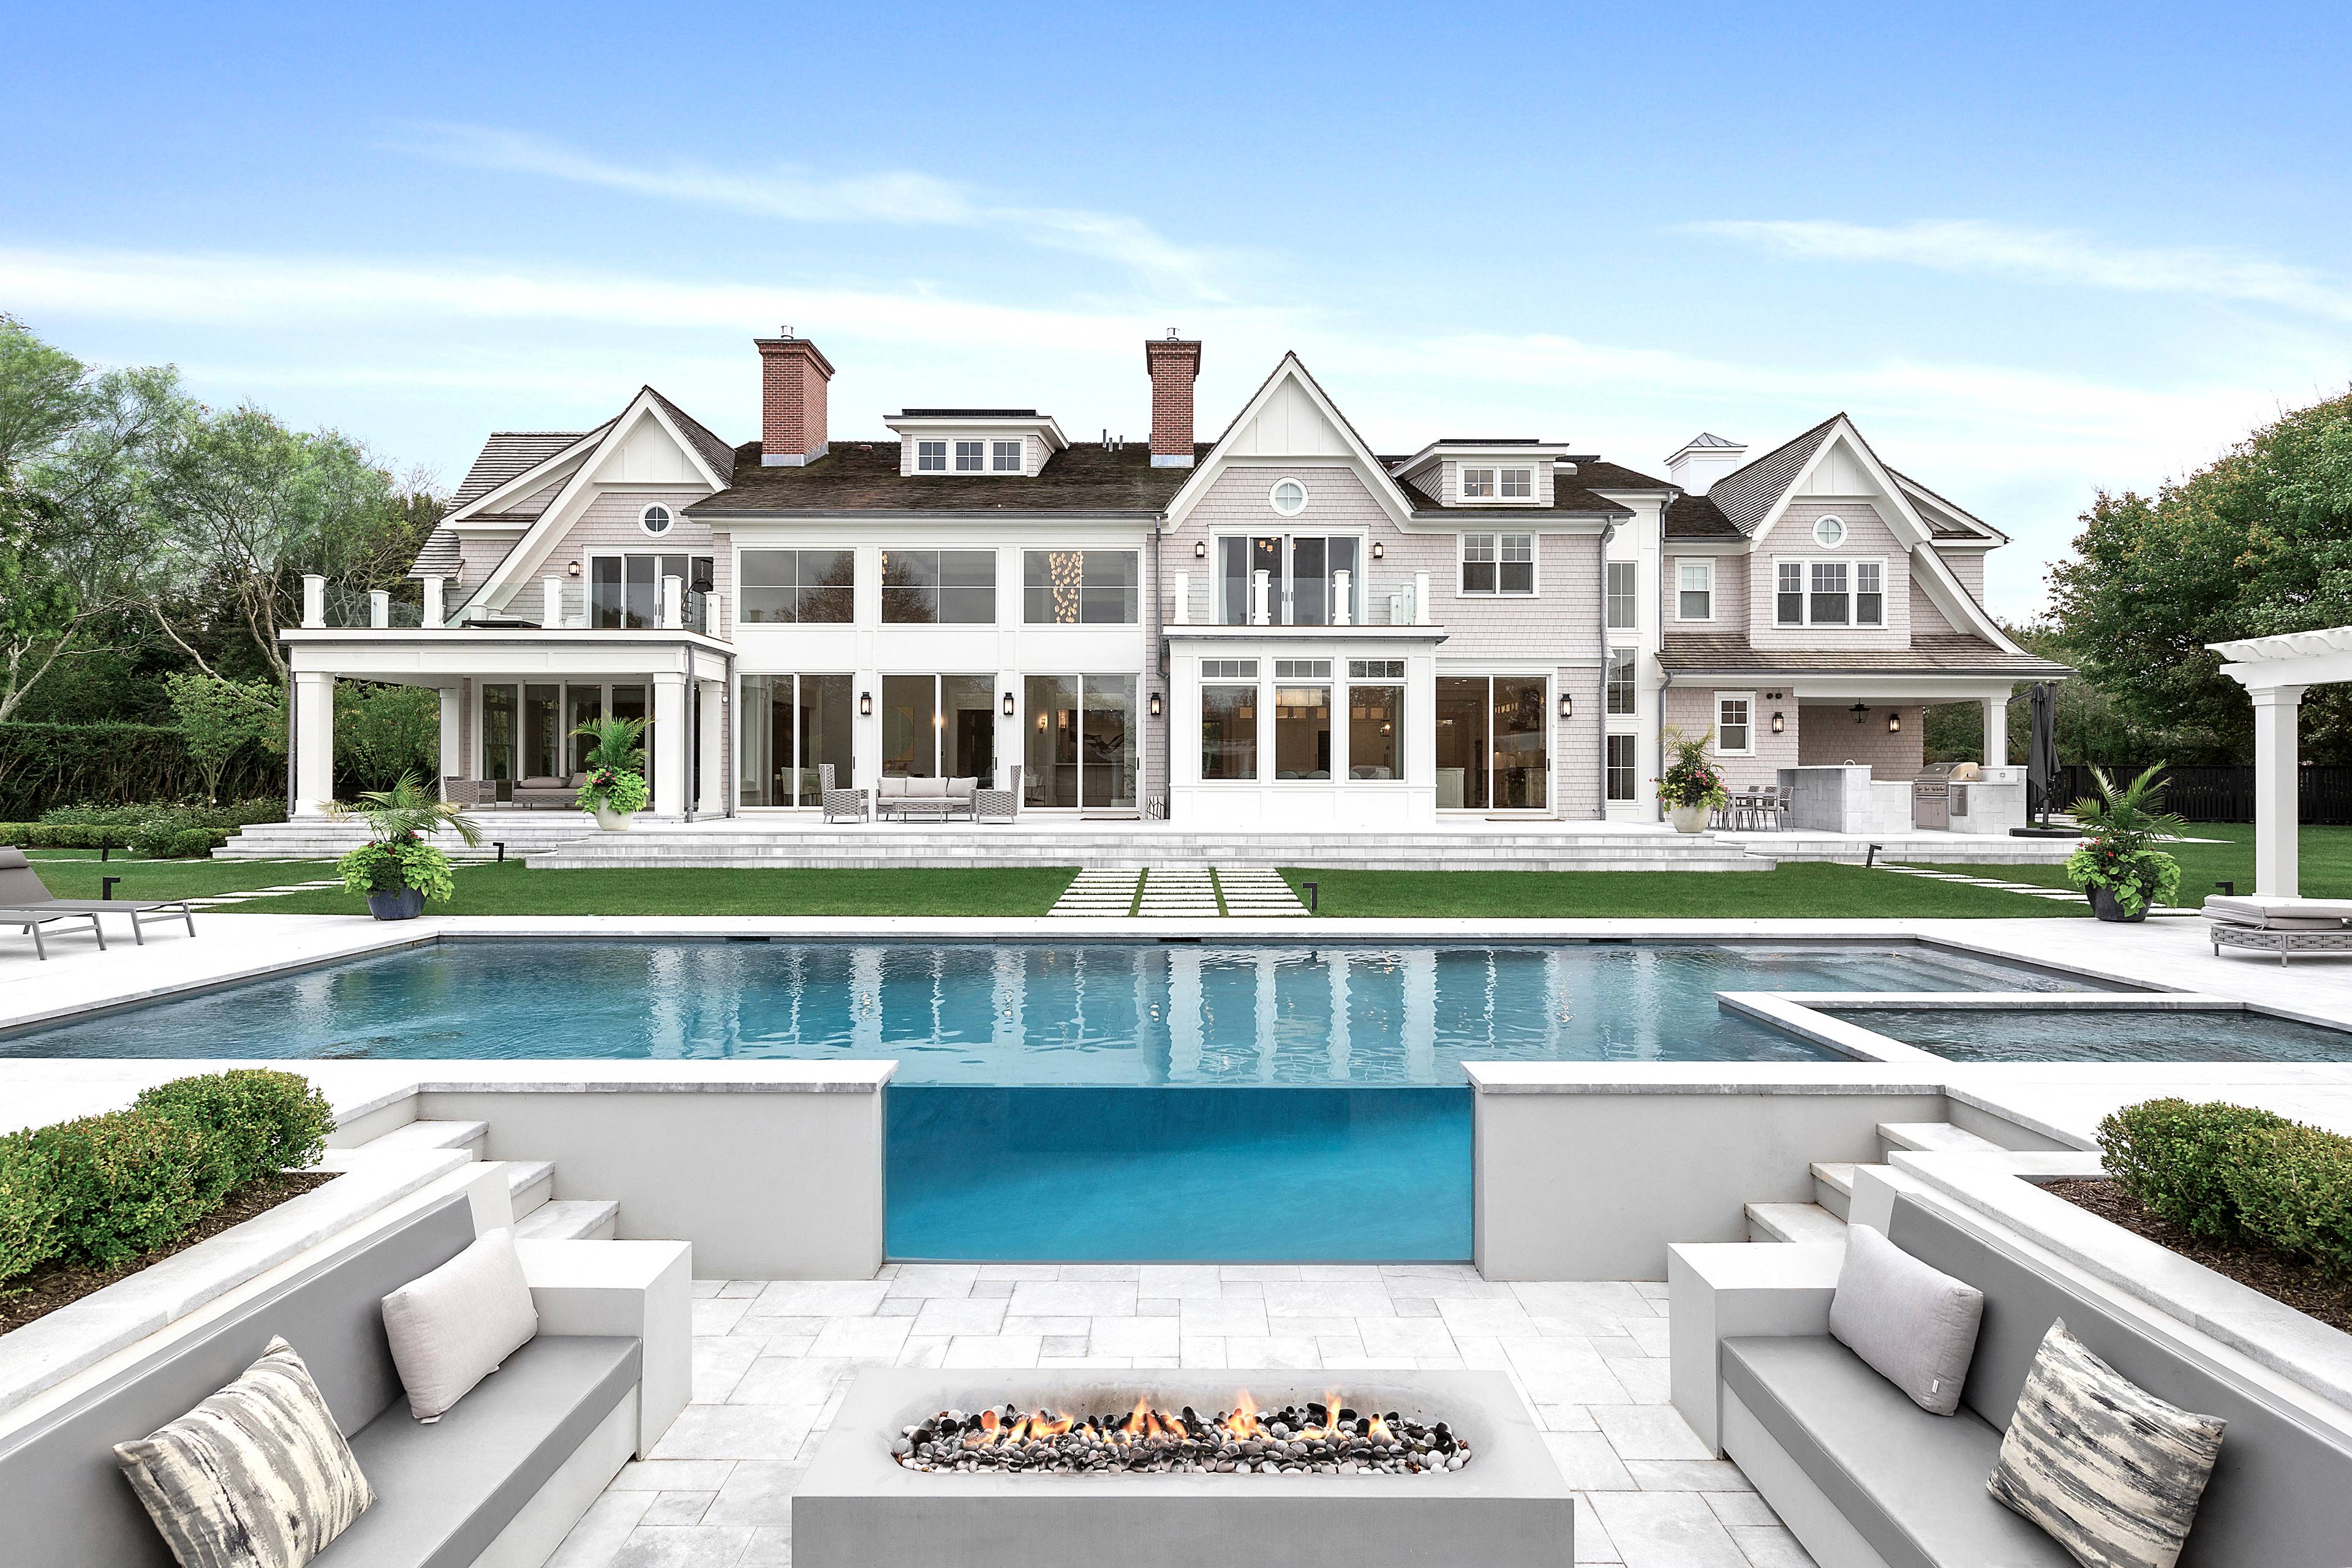 The Most Amenity Driven Compound in the Hamptons